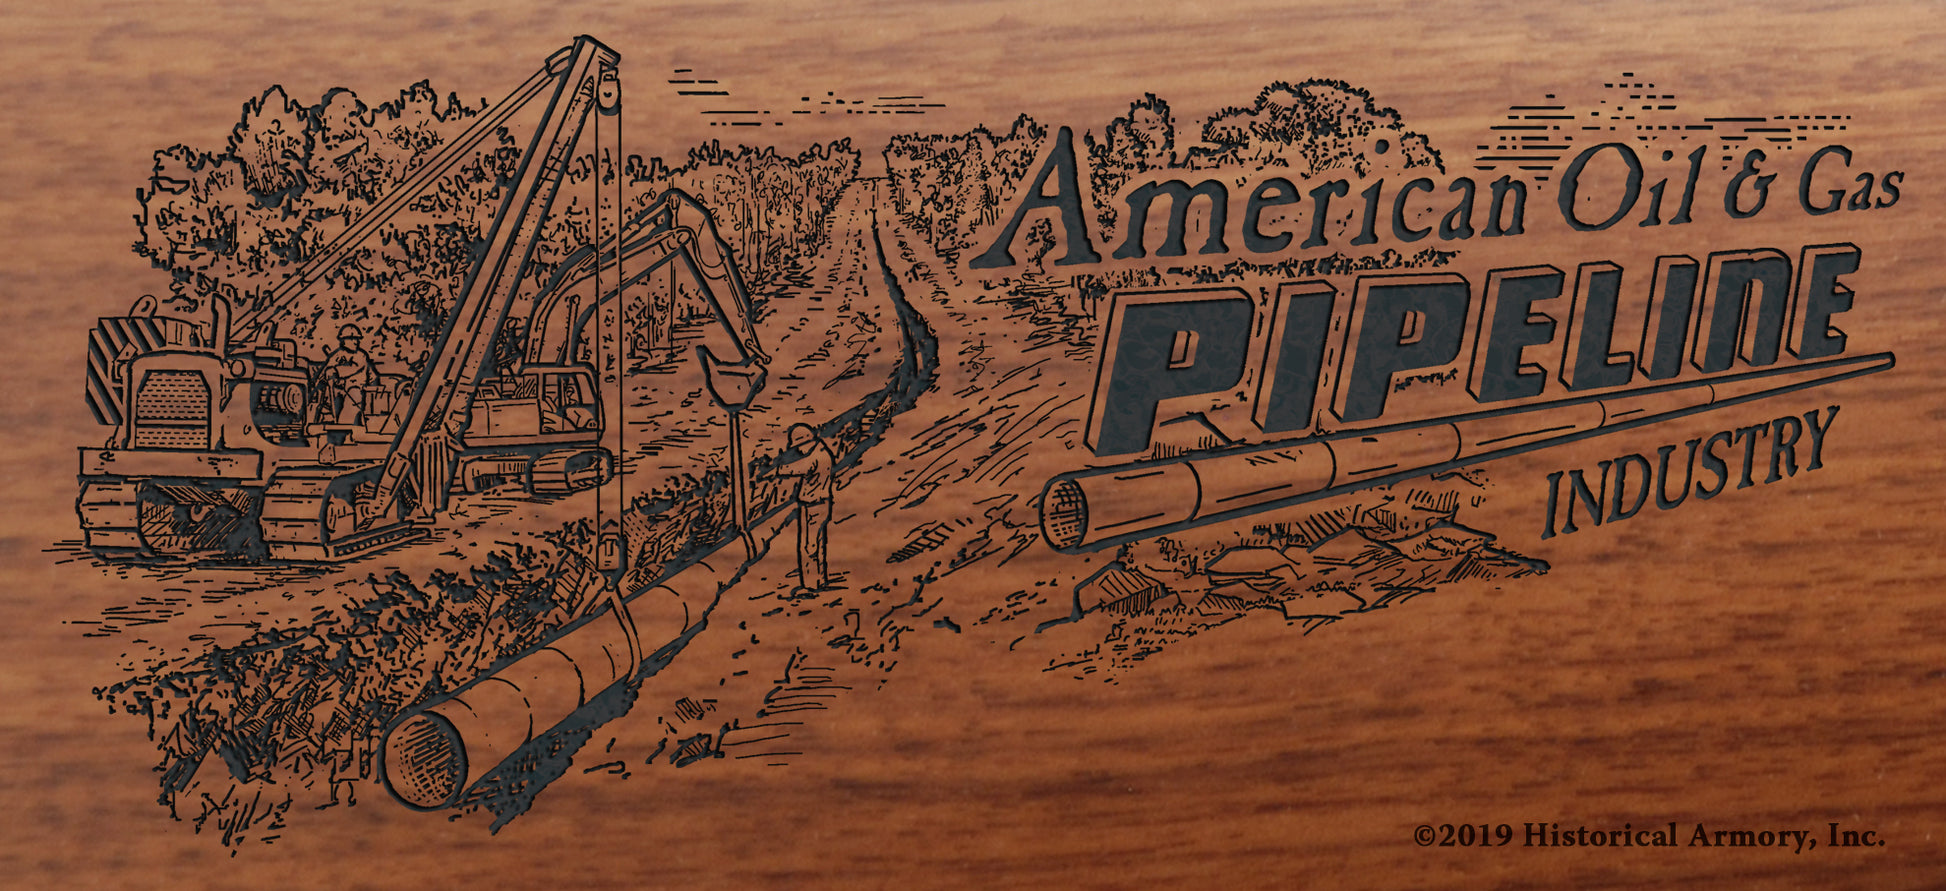 American Oil and Gas Pipeline Industry detail of engraved Henry Rifle